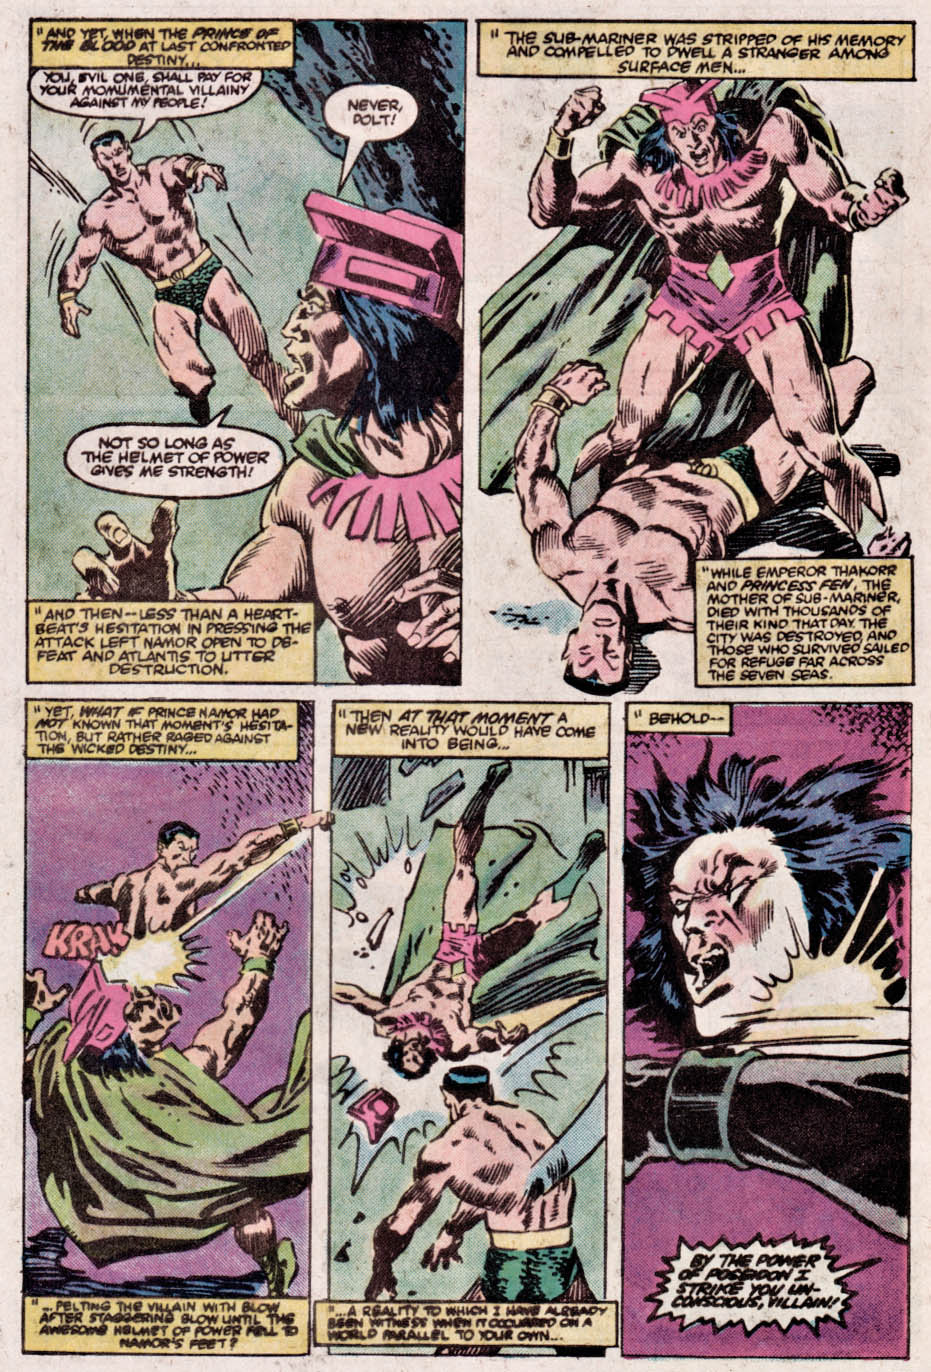 What If? (1977) issue 41 - The Sub-mariner had saved Atlantis from its destiny - Page 5